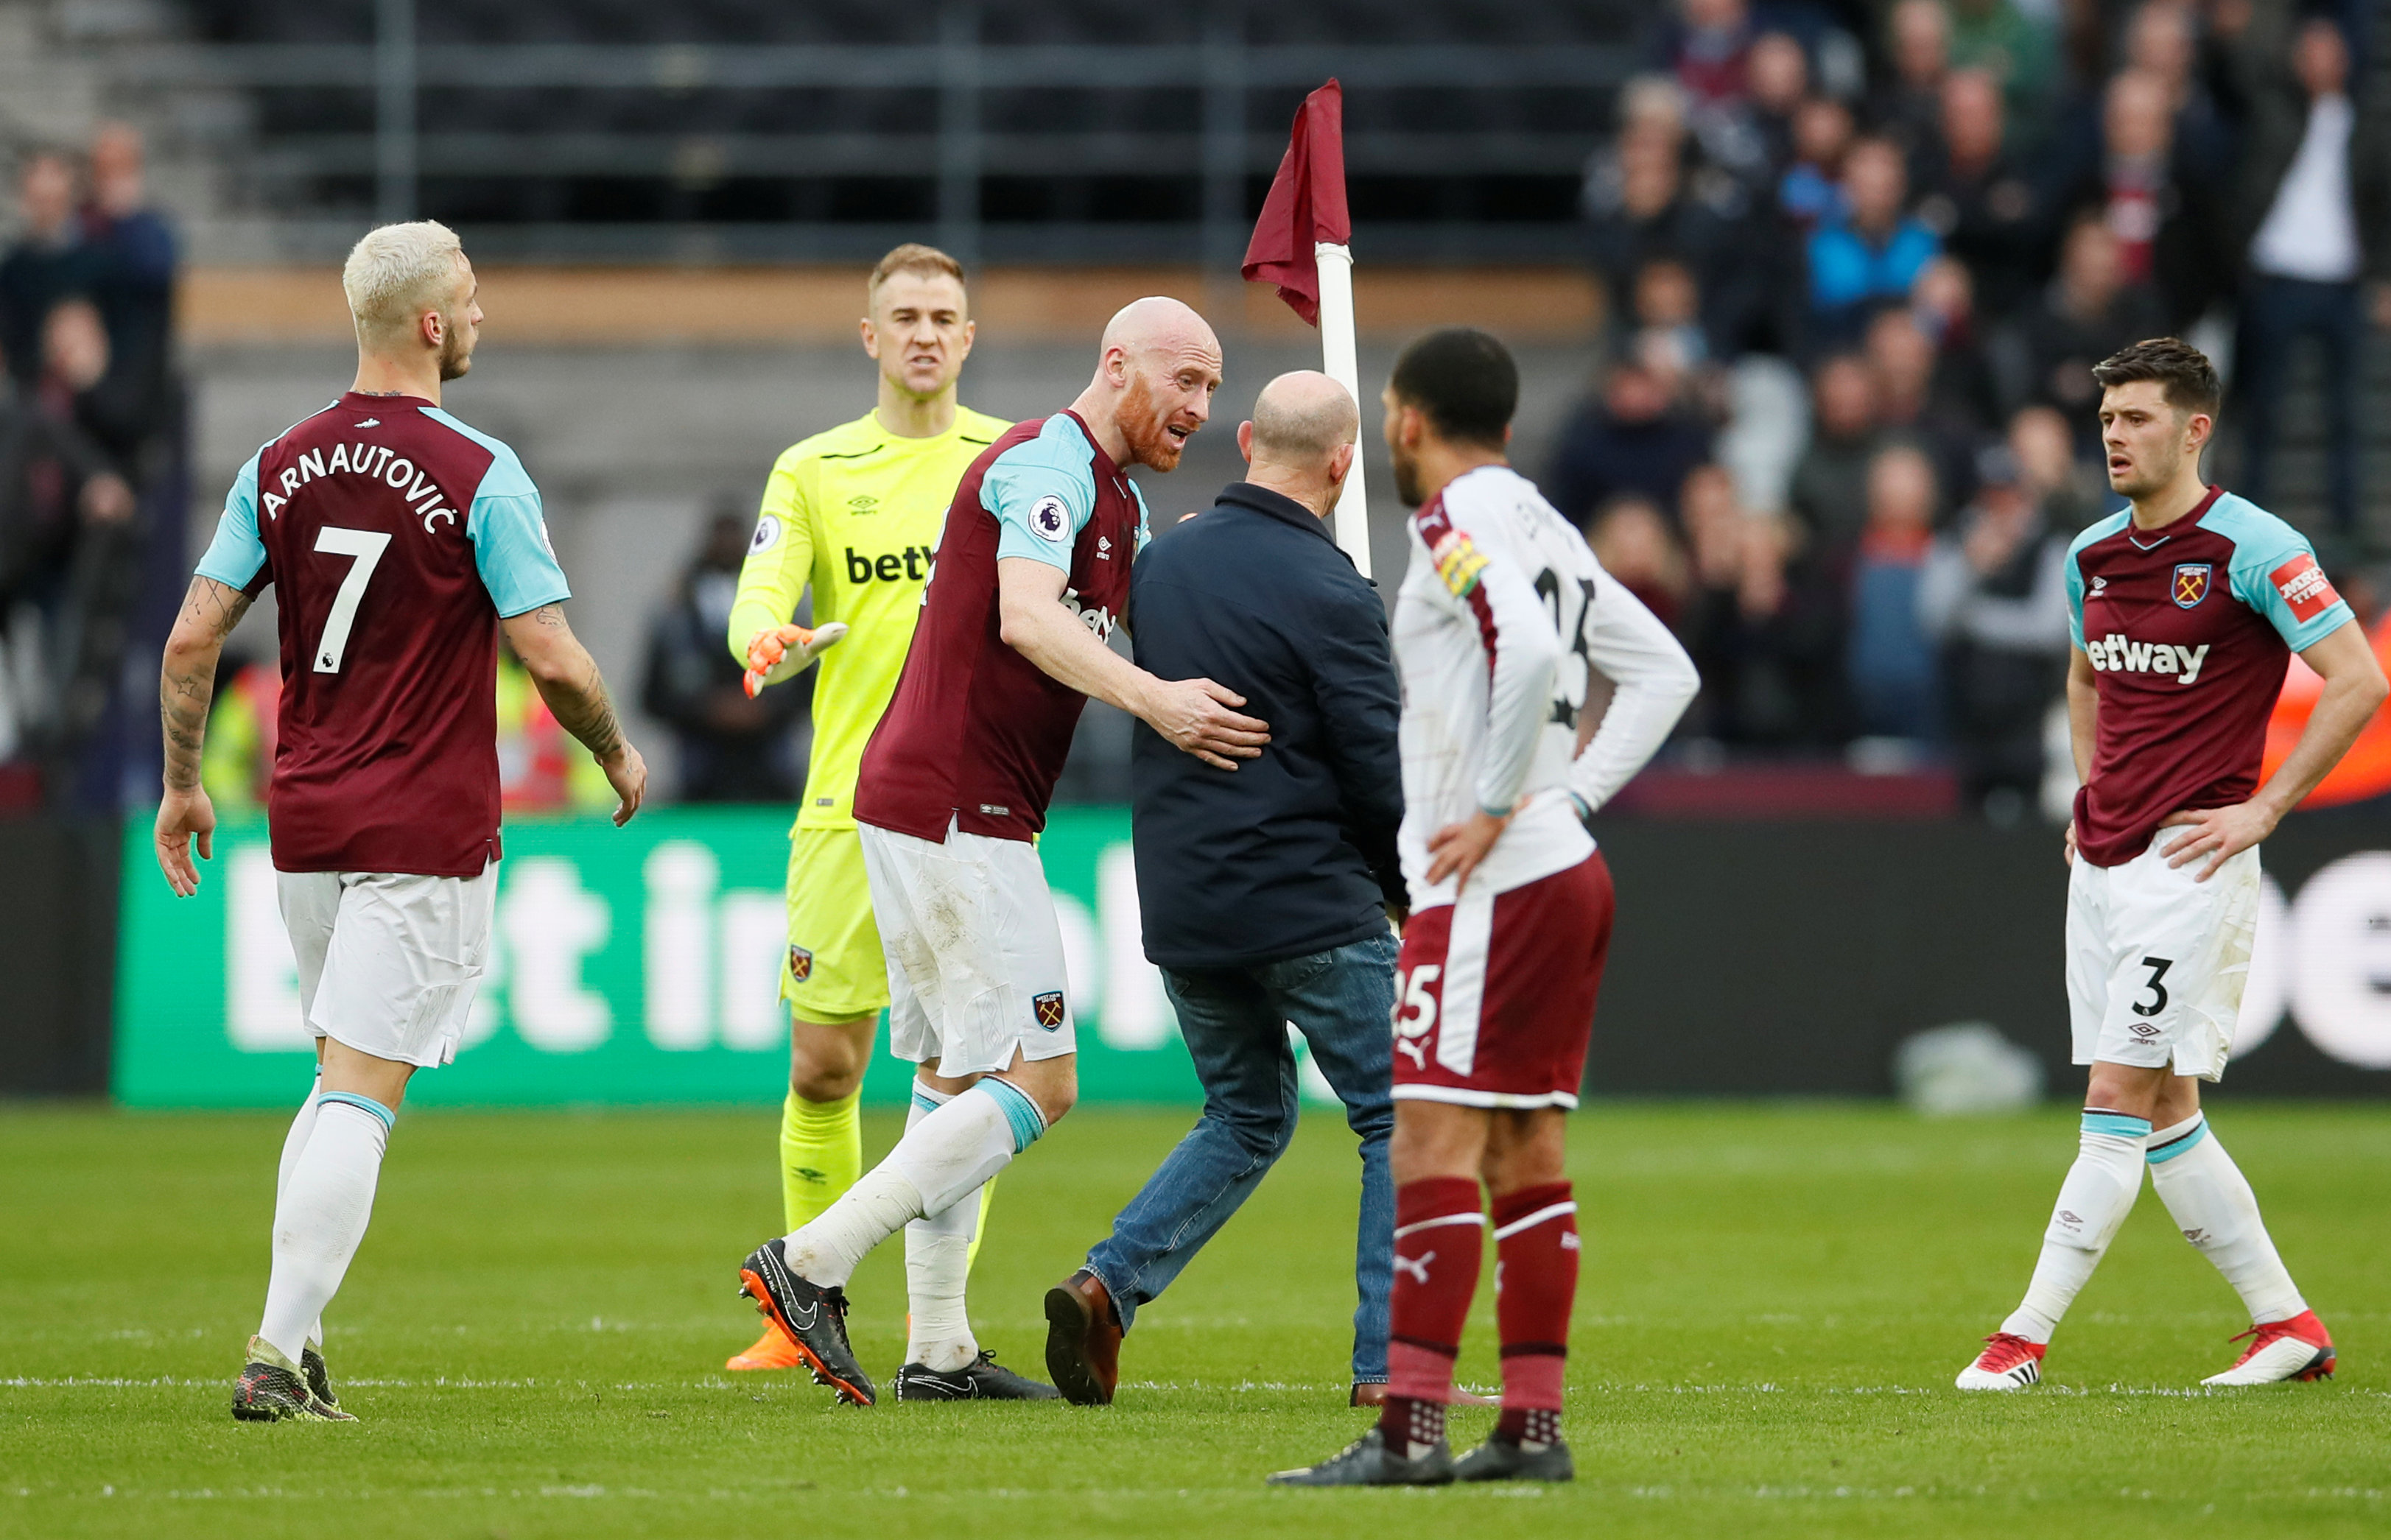 Football Chaos reigns as West Ham lose at home to Burnley